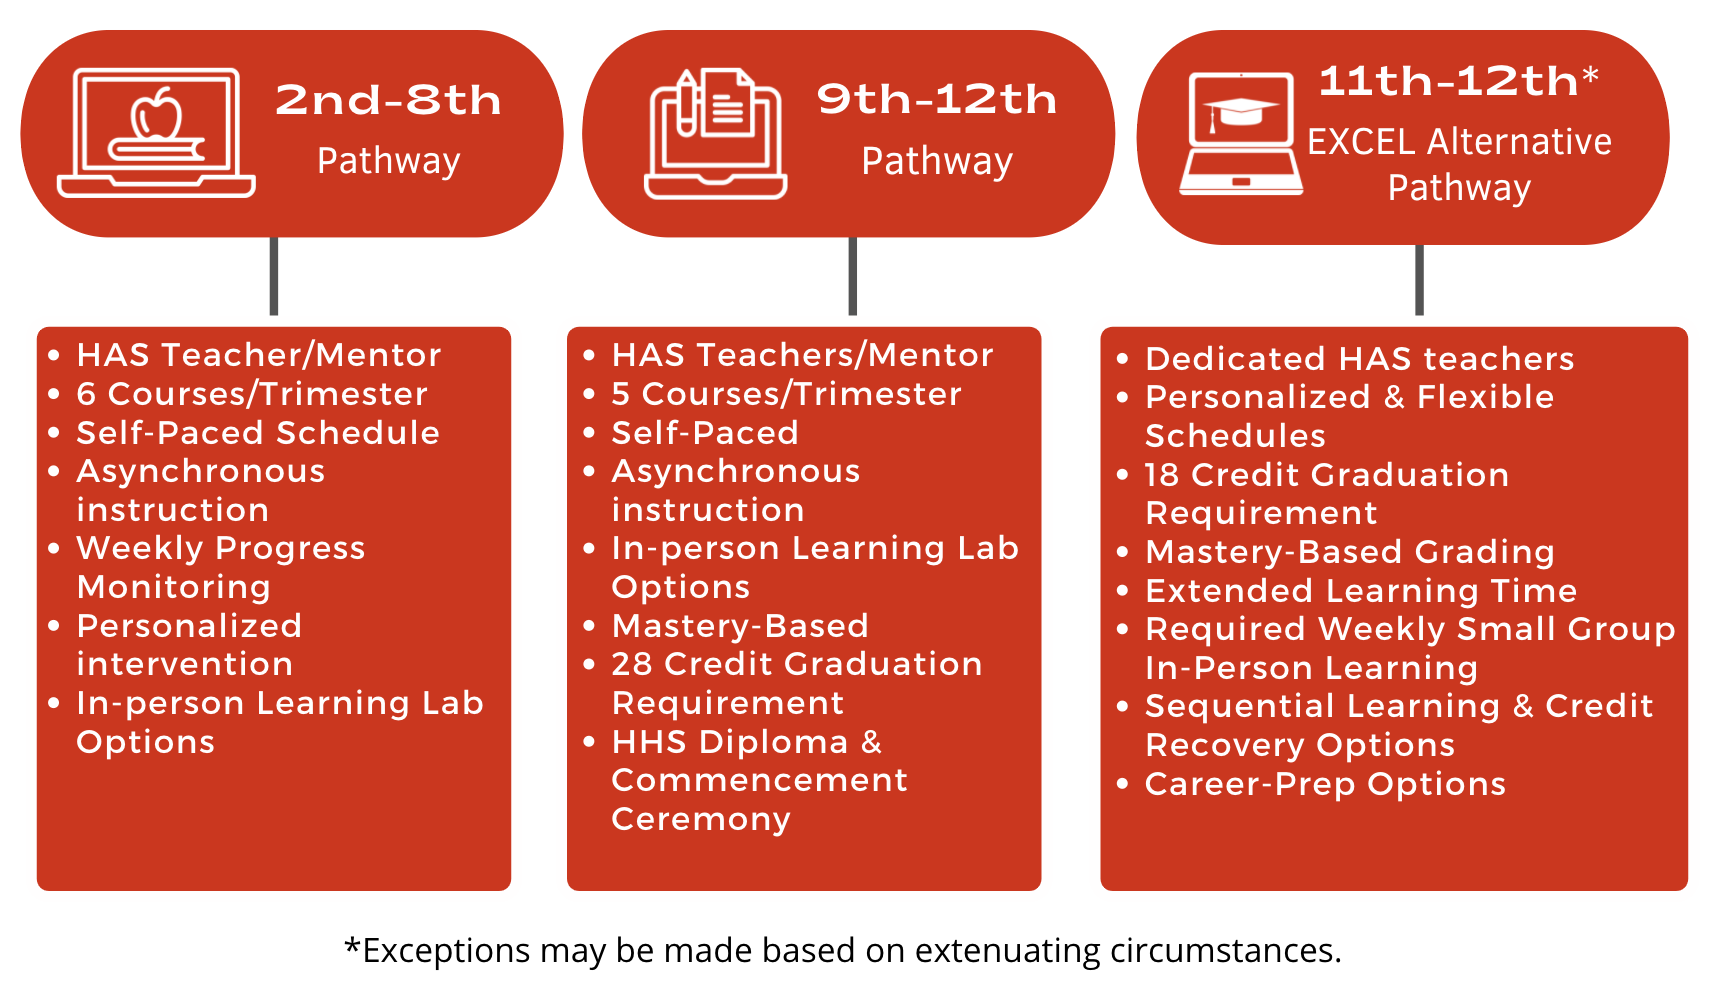 Broncho Virtual Pathways, 2nd-8th Pathway has HAS Teacher/Mentor, 6 Courses/Trimester, Self-Paced Schedule, Asynchronous Instruction, Weekly progress monitoring, personalized intervention, in-person learning lab option. 9th-12th pathway includes HAS teachers/mentors, 5 courses/trimester, self-paced, asynchronous instruction, in-person learning lab options, mastery-based, 28 credit graduation requirement, HHS diploma and commencement ceremony. 11th-12th EXCEL alternative pathway has HAS teachers/mentors, personalized and flexible schedules, 18 credit graduation requirement, mastery-based grading, extended learning time, required weekly small group in-person learning, sequential learning and credit recovery options, career-prep options.